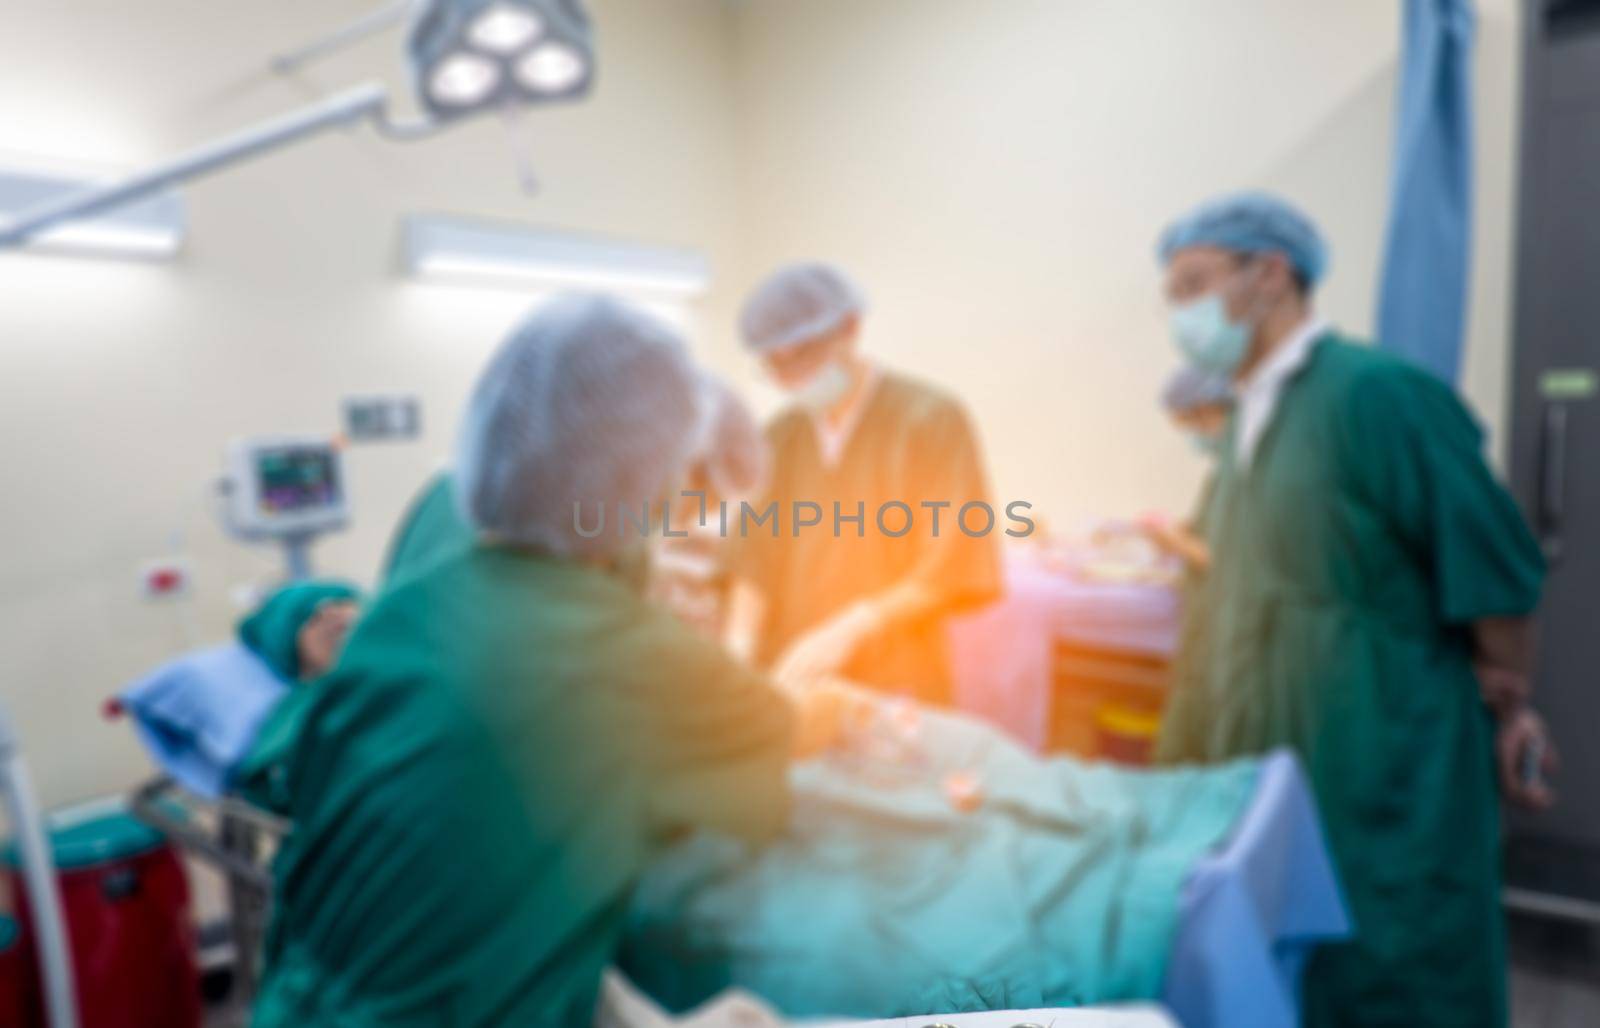 Blurred background of modern operating room at hospital with Group of surgeons in operating room with surgery equipment. Modern medical background by chuanchai